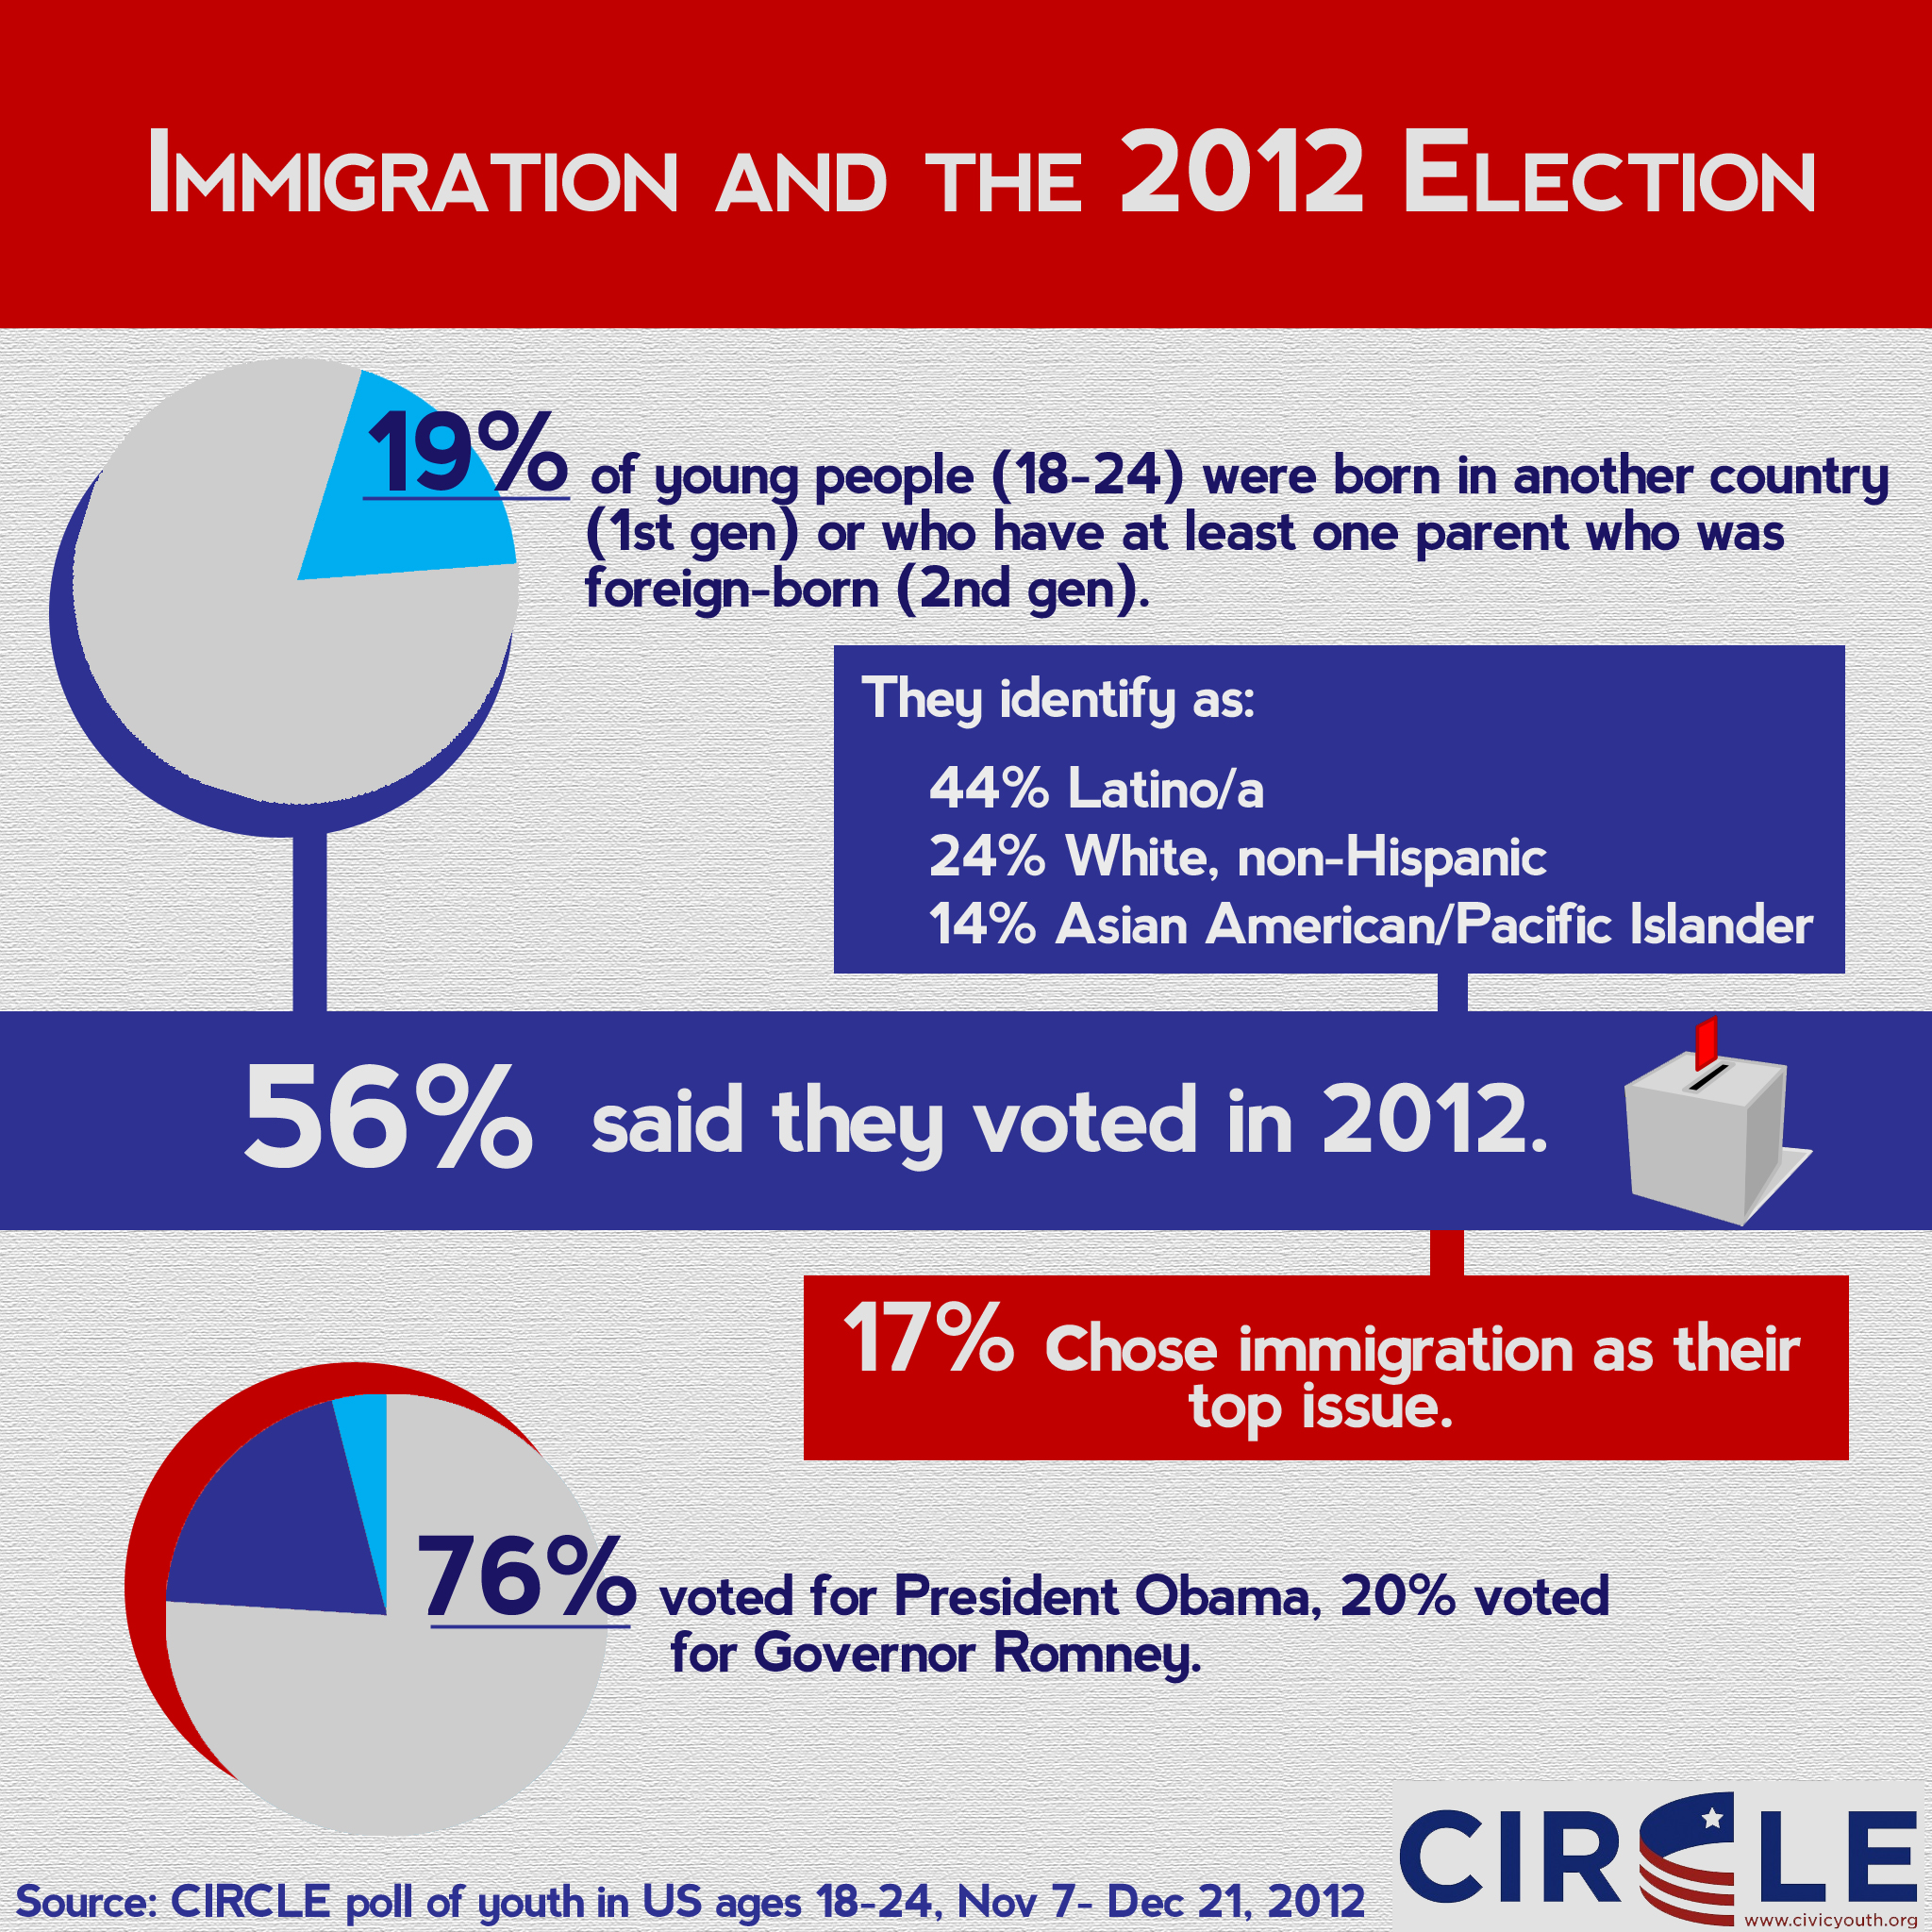 Infographic of immigration-related issues in the 2012 election